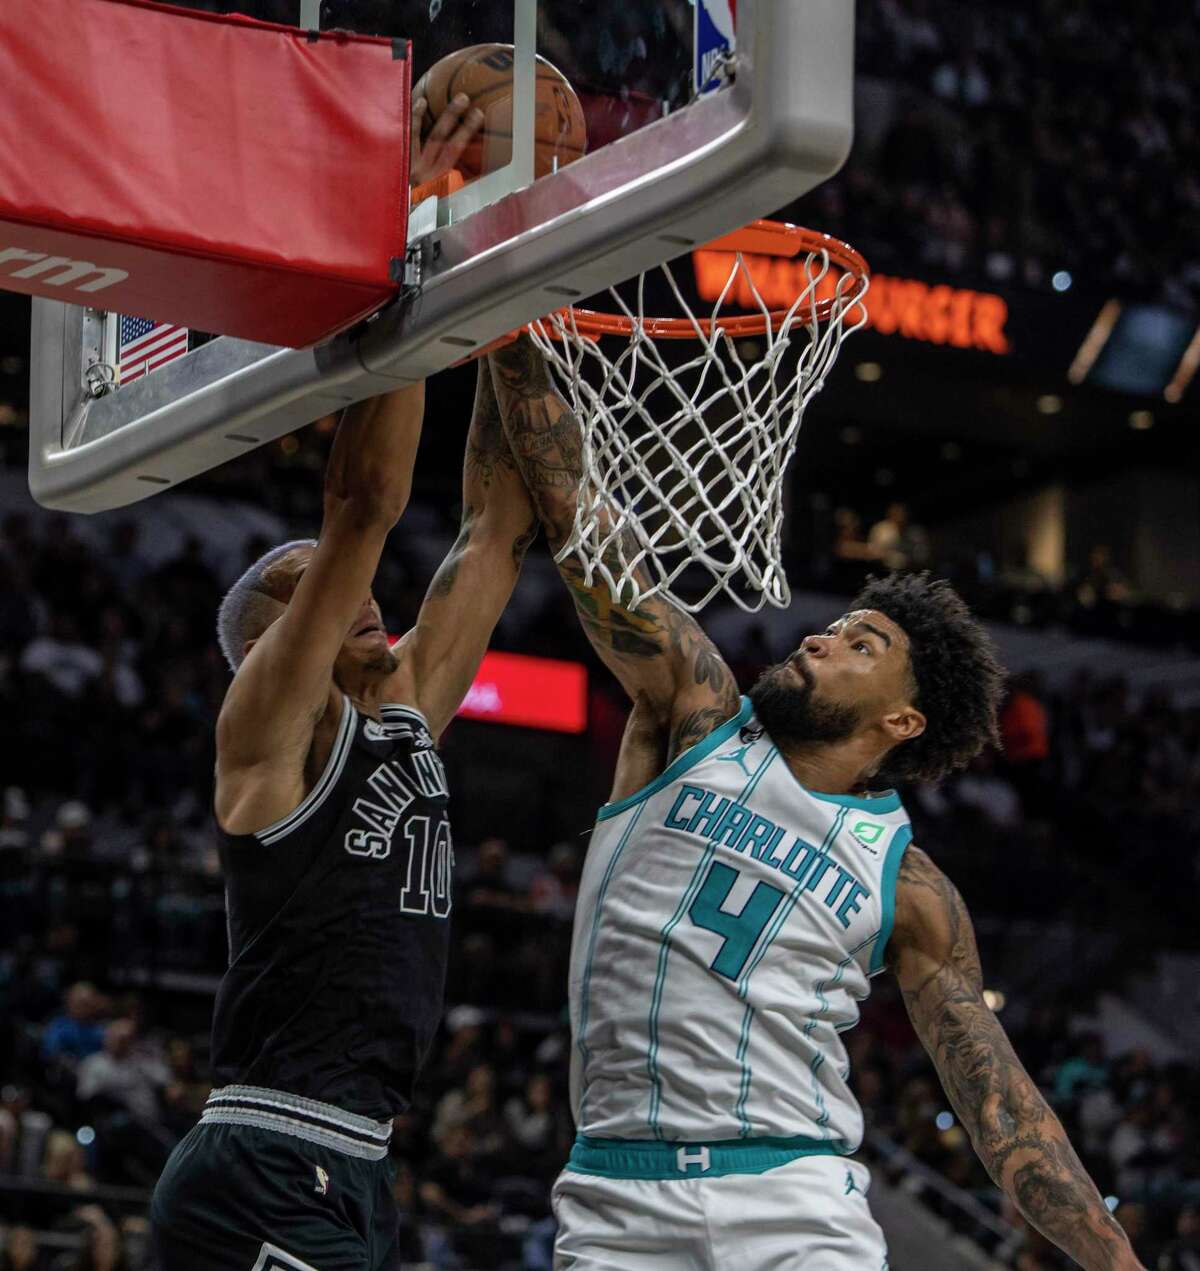 Charlotte Hornets center Nick Richards fouls San Antonio Spurs forward Jeremy Sochan Wednesday night, Oct. 19, 2022, in the AT&T Center as Sochan goes for a dunk during their regular season opening night matchup.